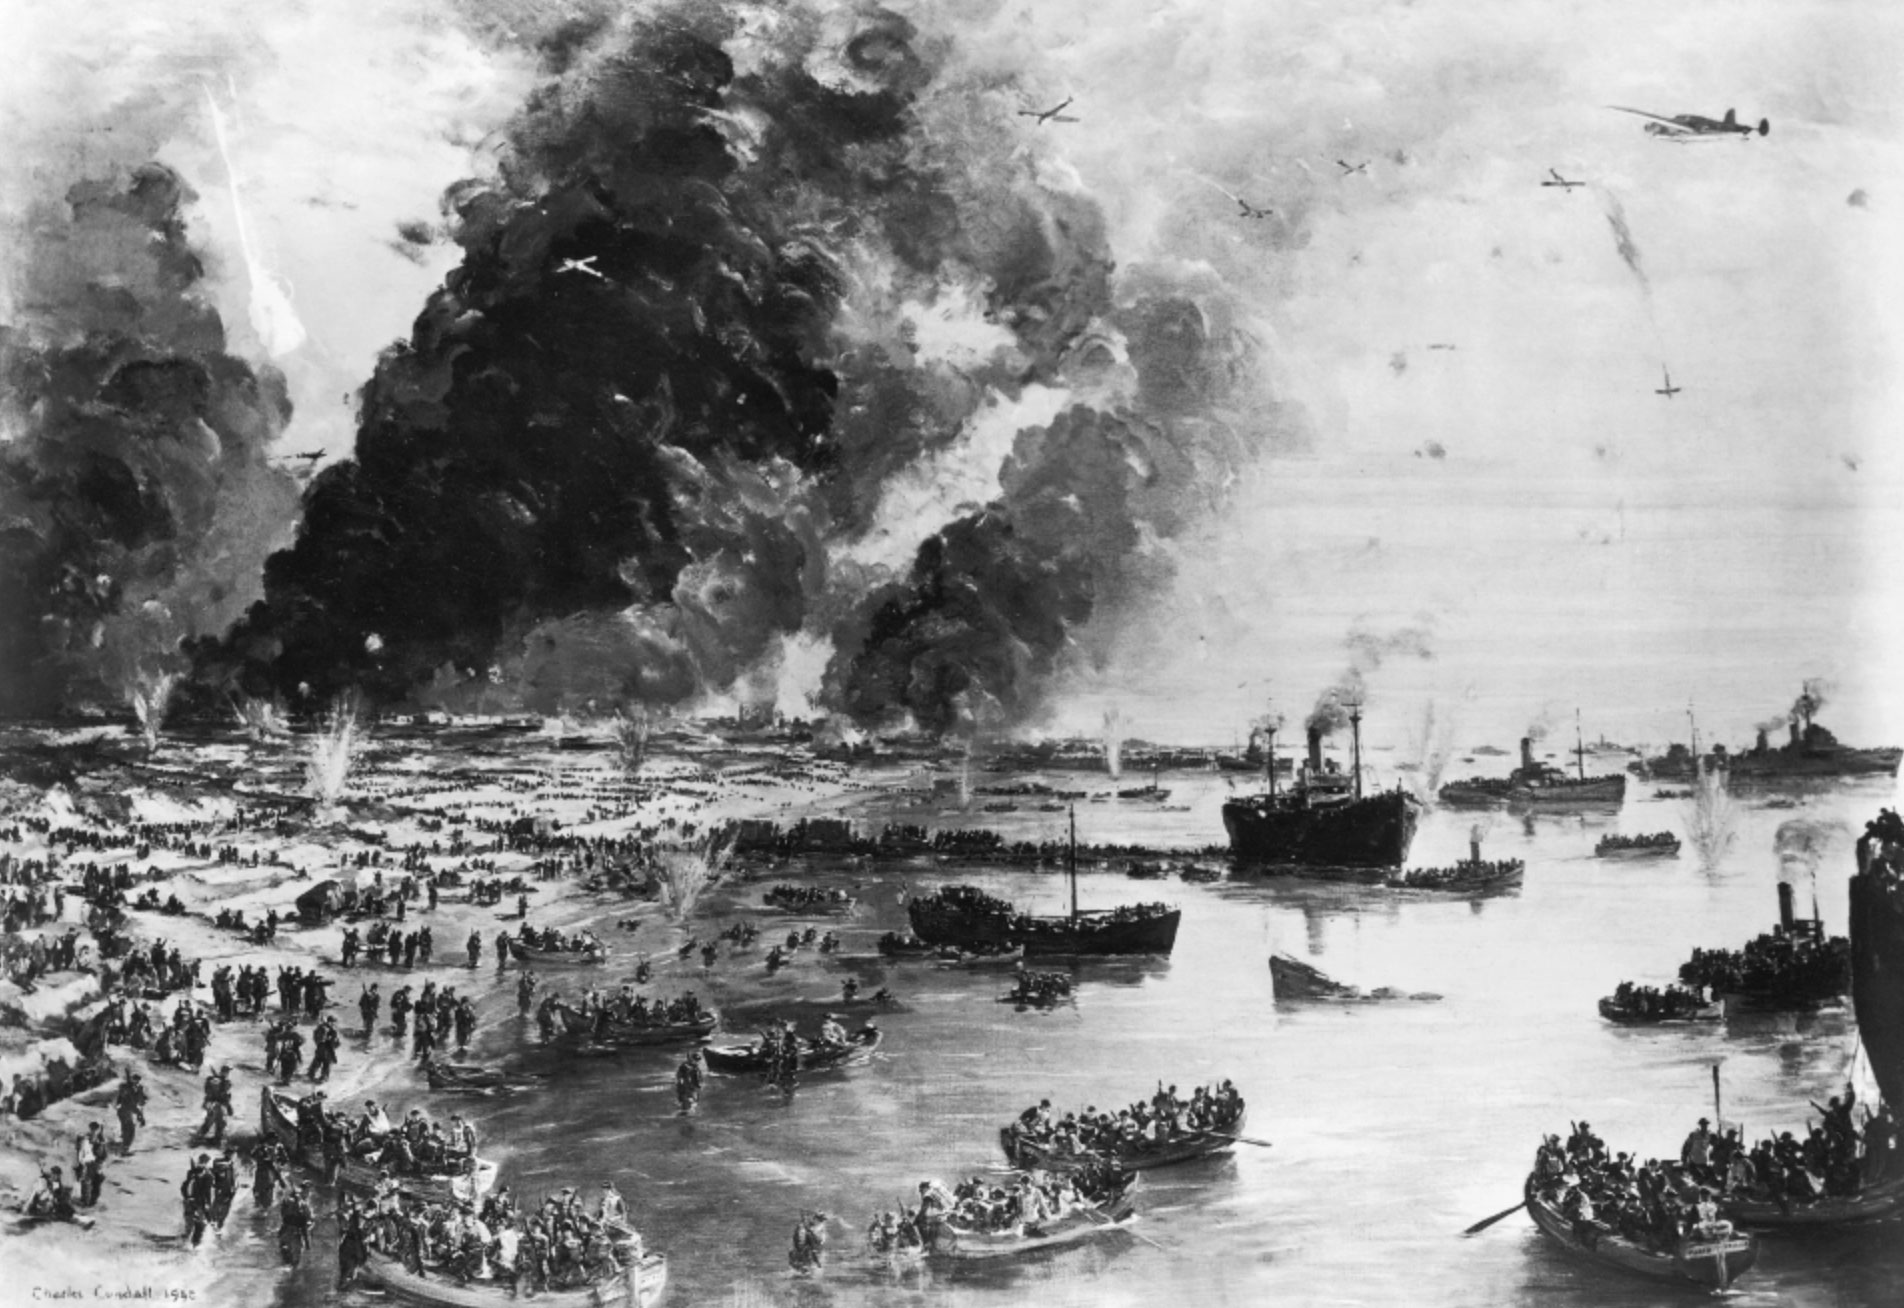 The “Miracle of Dunkirk” came at high cost - Legion Magazine